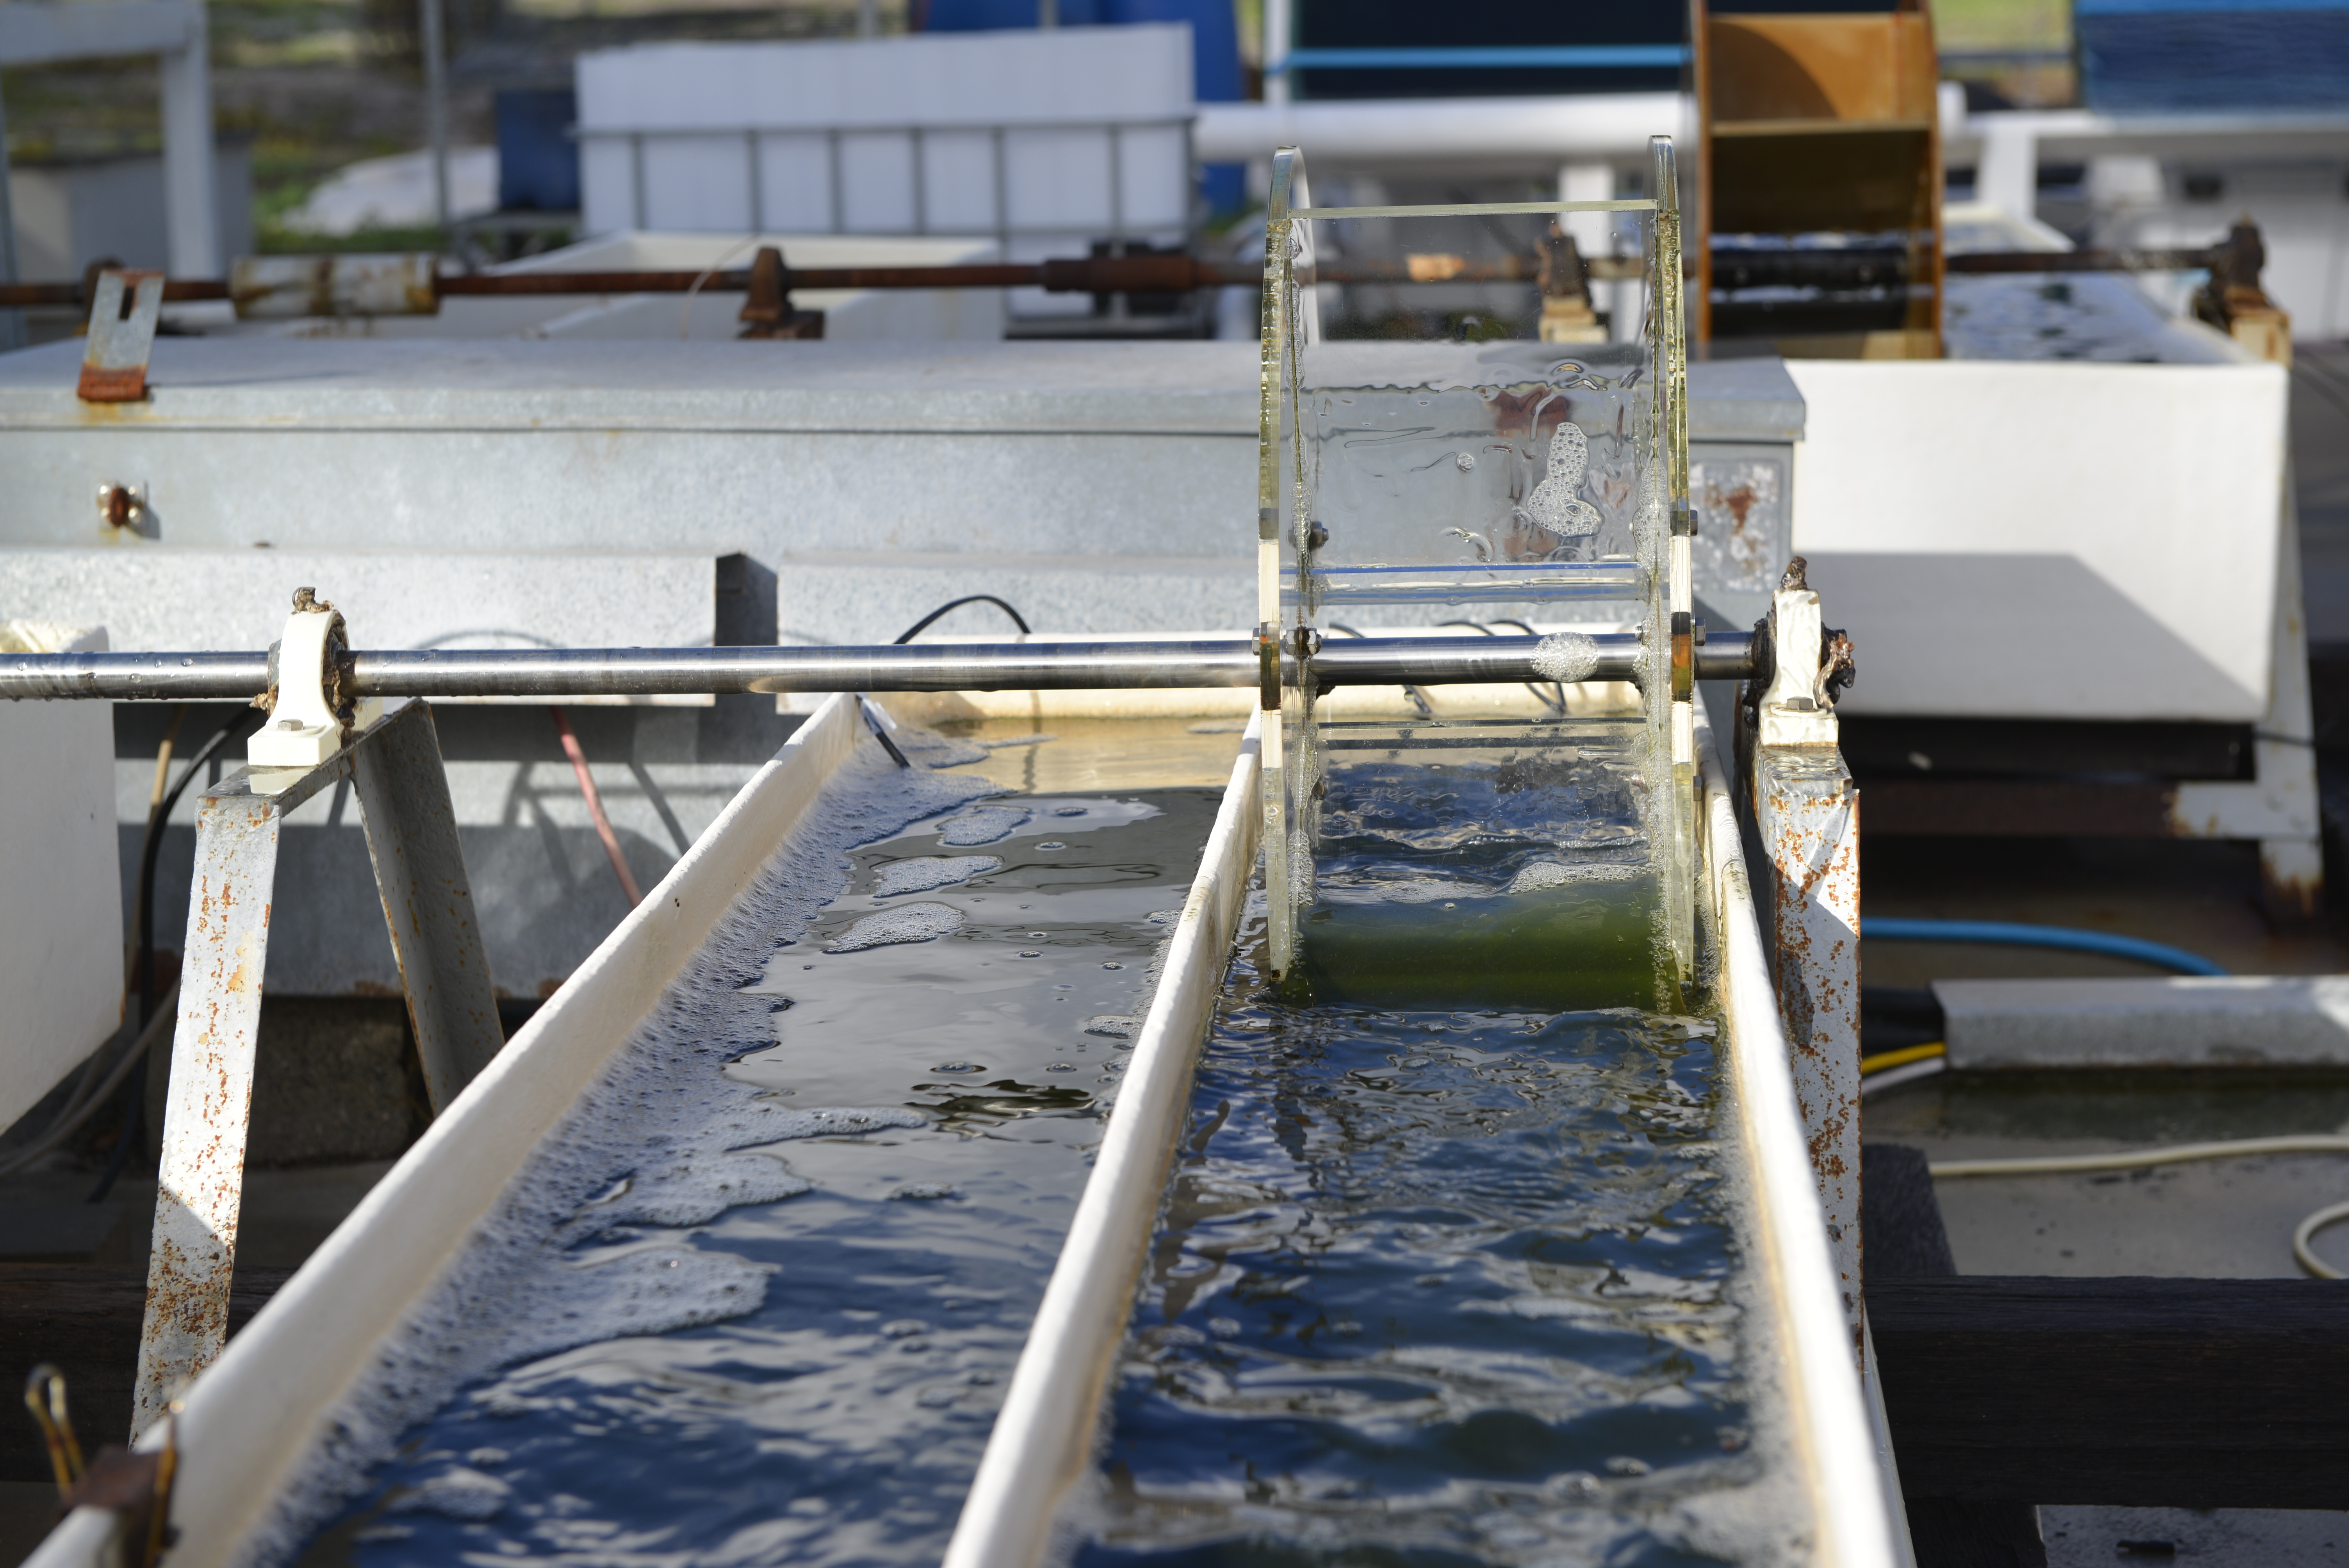 Algae can turn wastewater into a protein-rich valuable feedstock